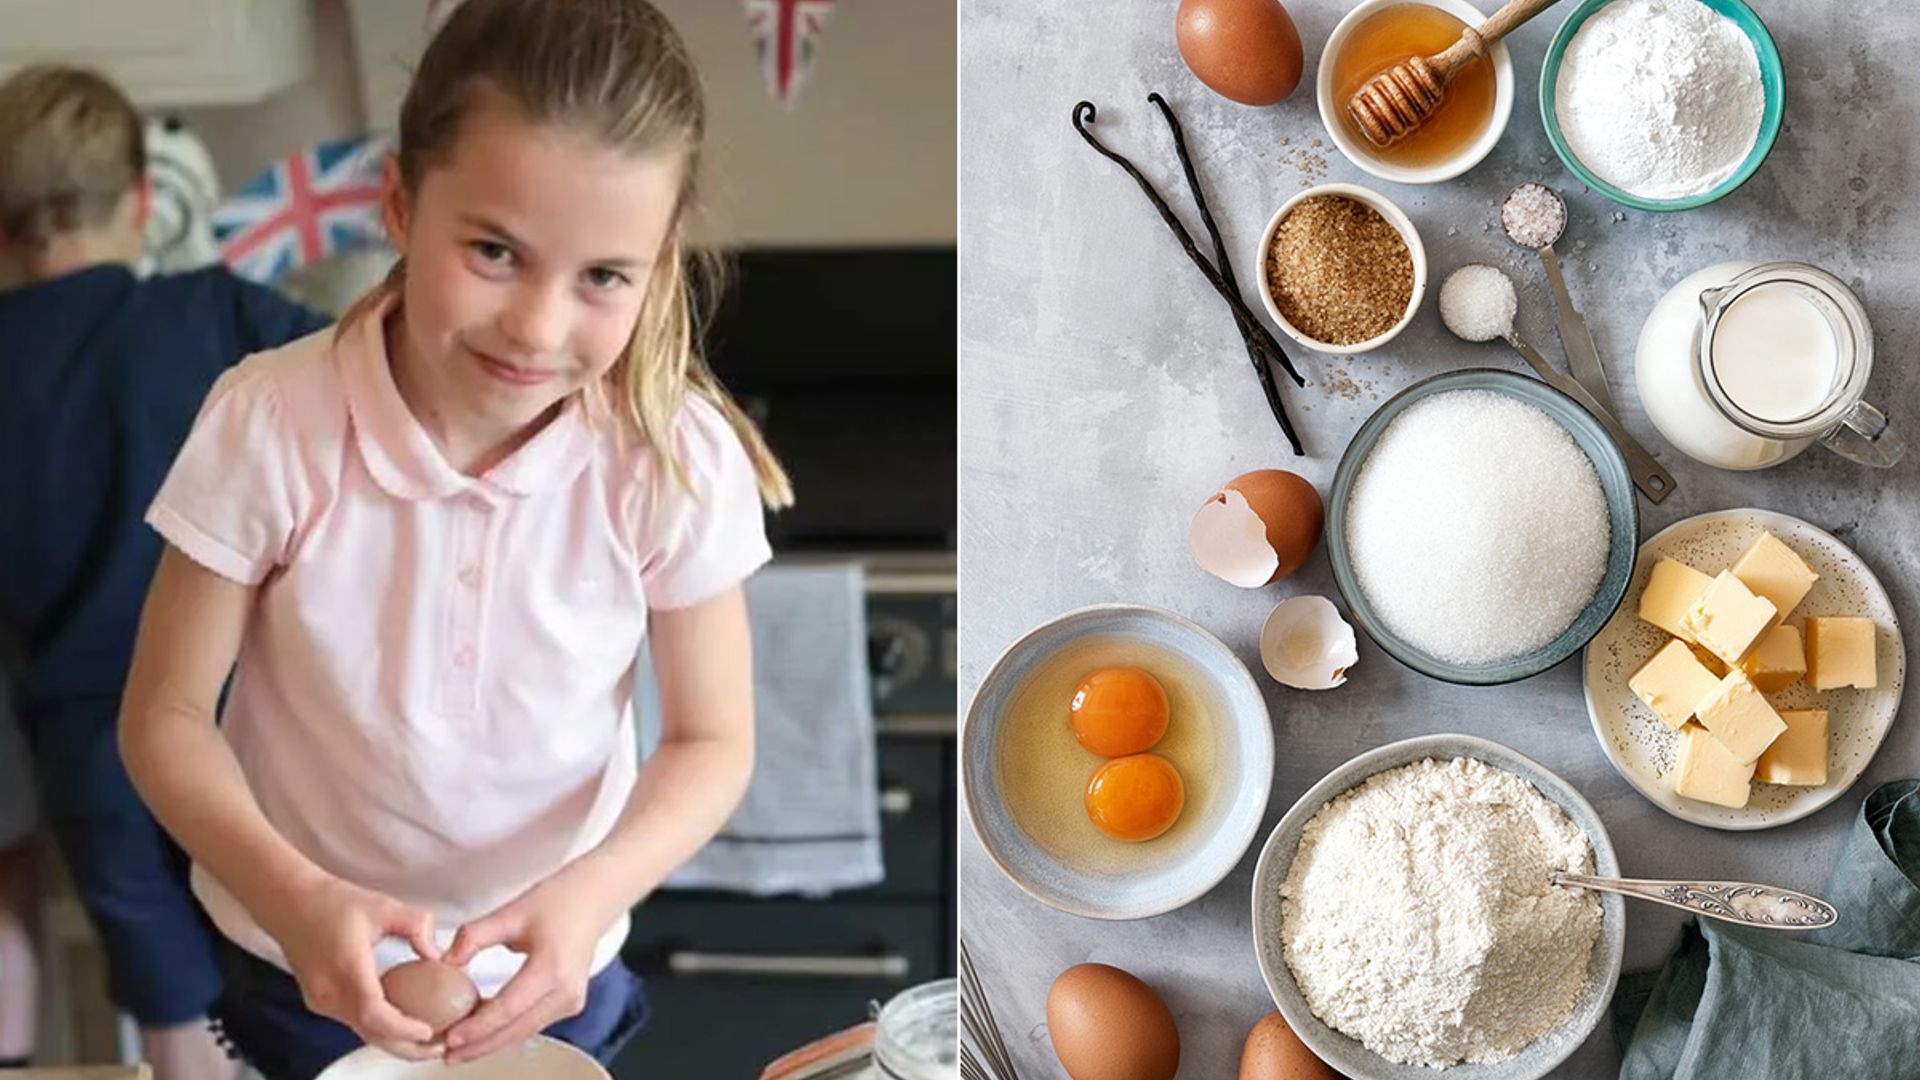 Royal children pictured baking: Prince George, Archie Harrison & more